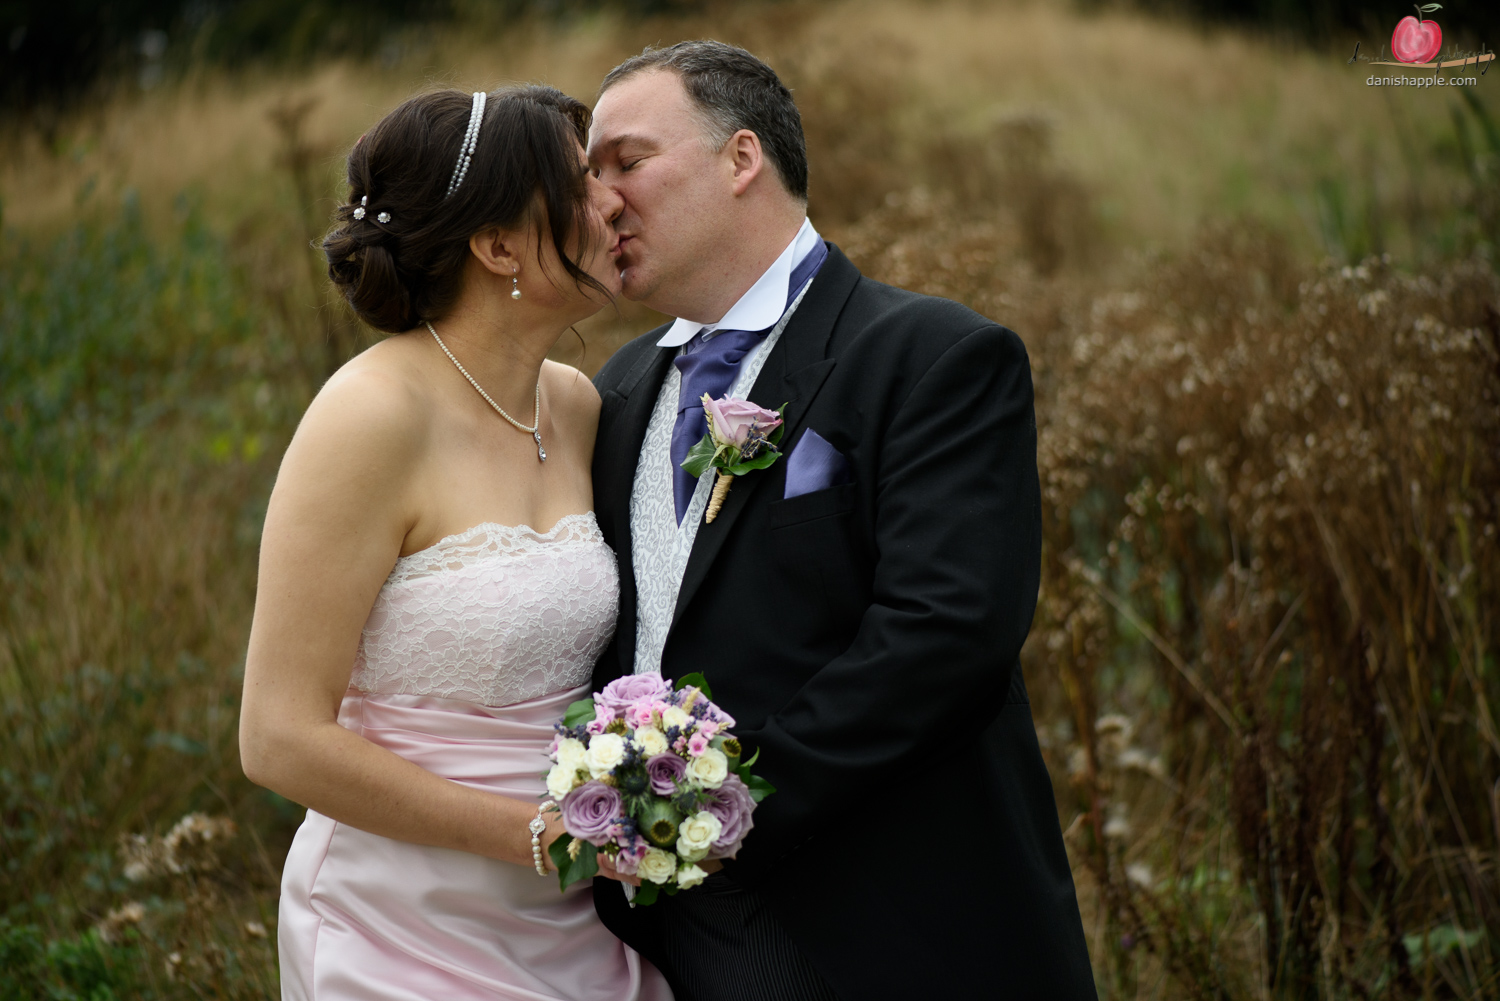 Nikon D810 for weddings – first impressions